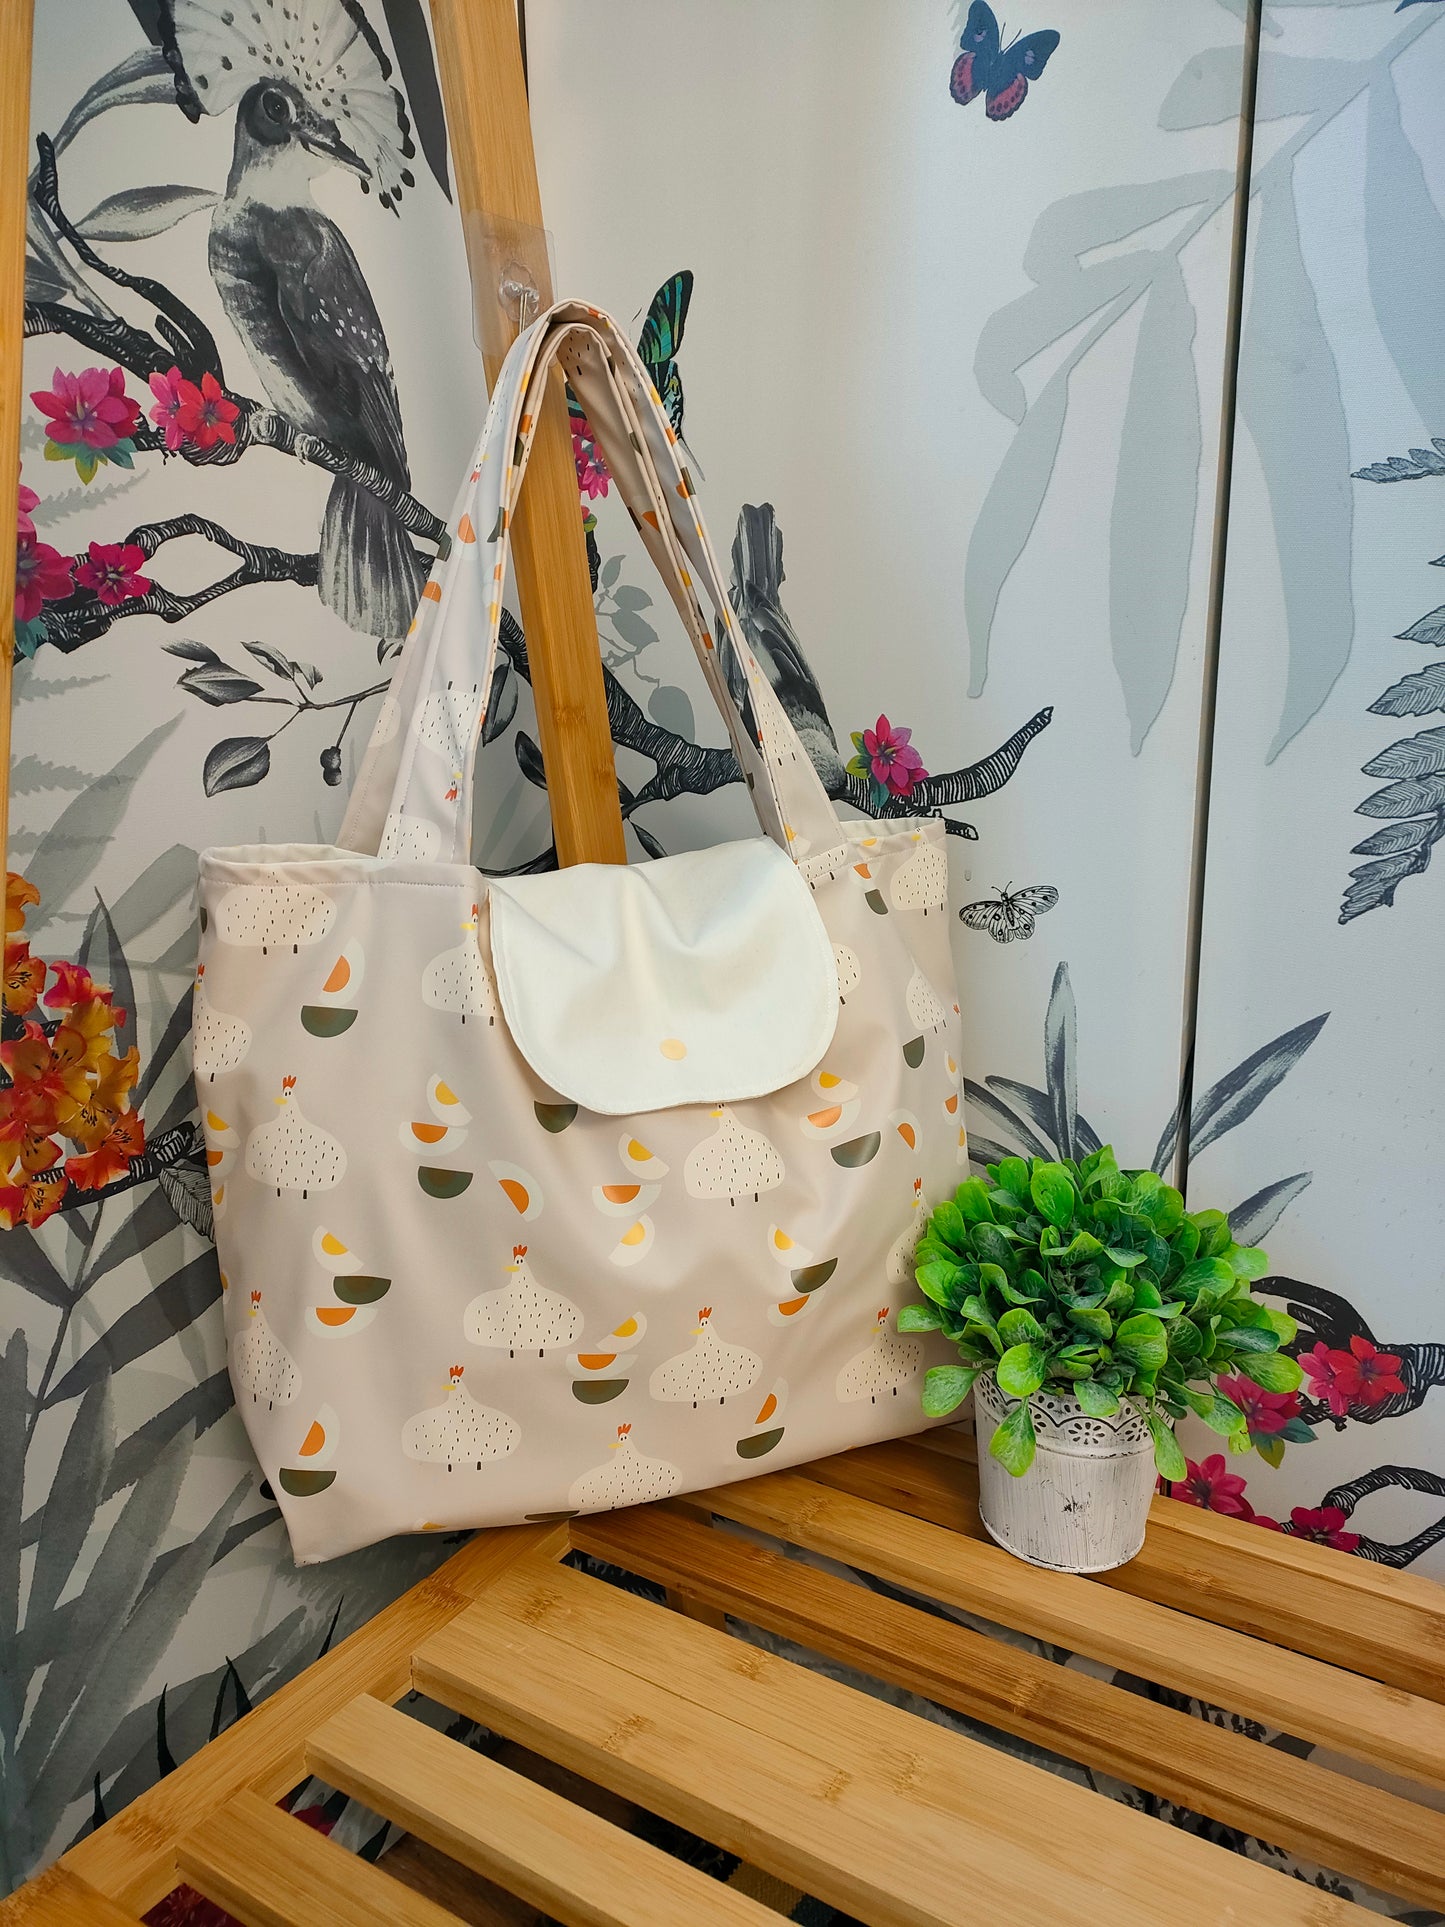 Chicken and Egg Shower Resistant Tote Bag with Inside Pocket, Fully Lined with Shoulder Strap, Everyday Shopping tote Bag, Gift for Chicken Lovers.